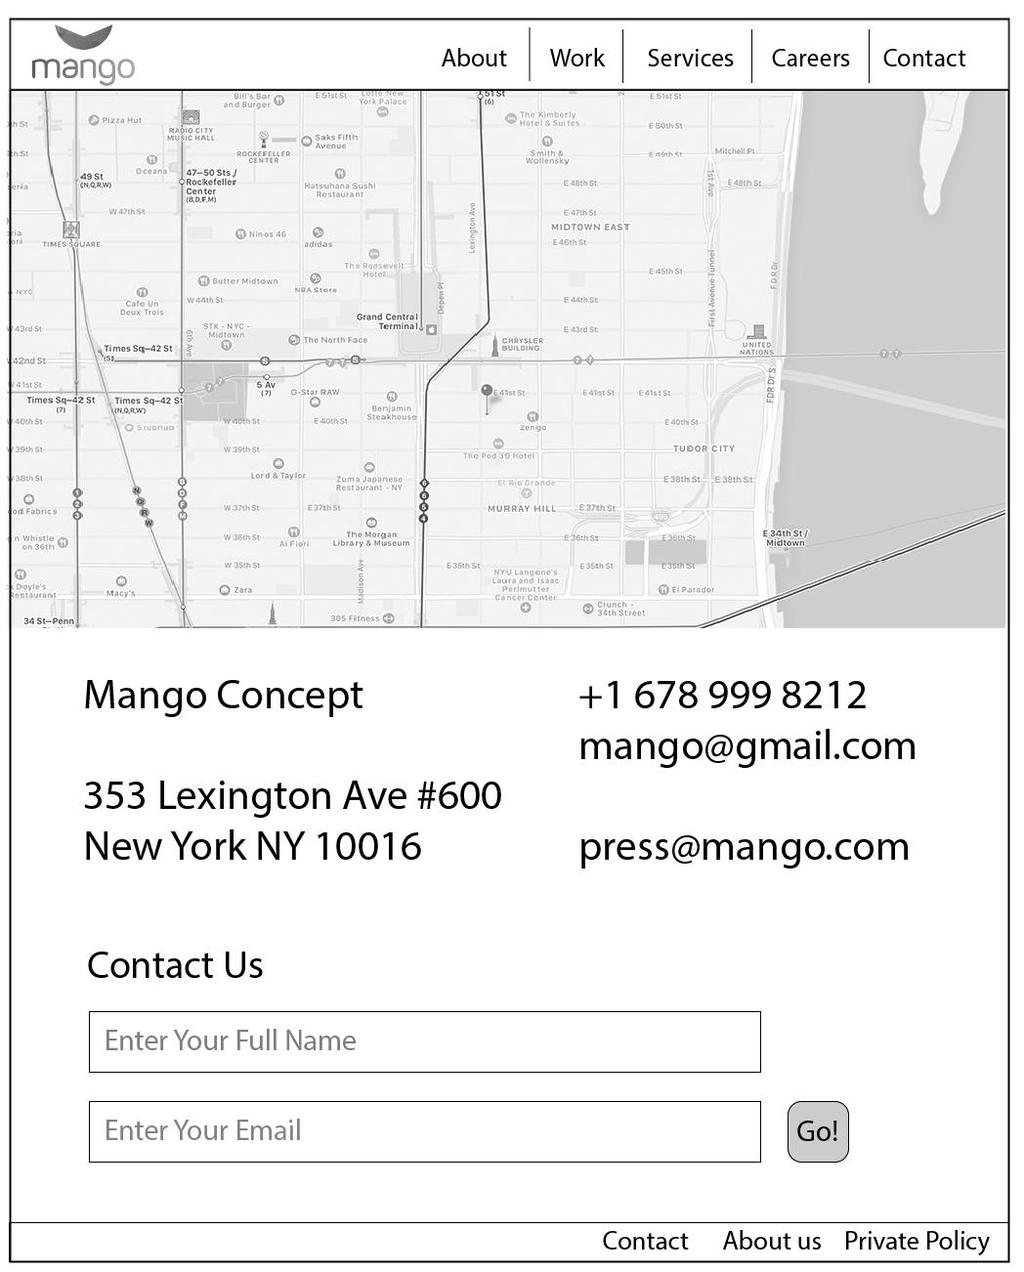 Notes SCREEN: Contact Page 1 This page will provide you will all the contact information you need to get in touch with Mango and also a form to submit your email.